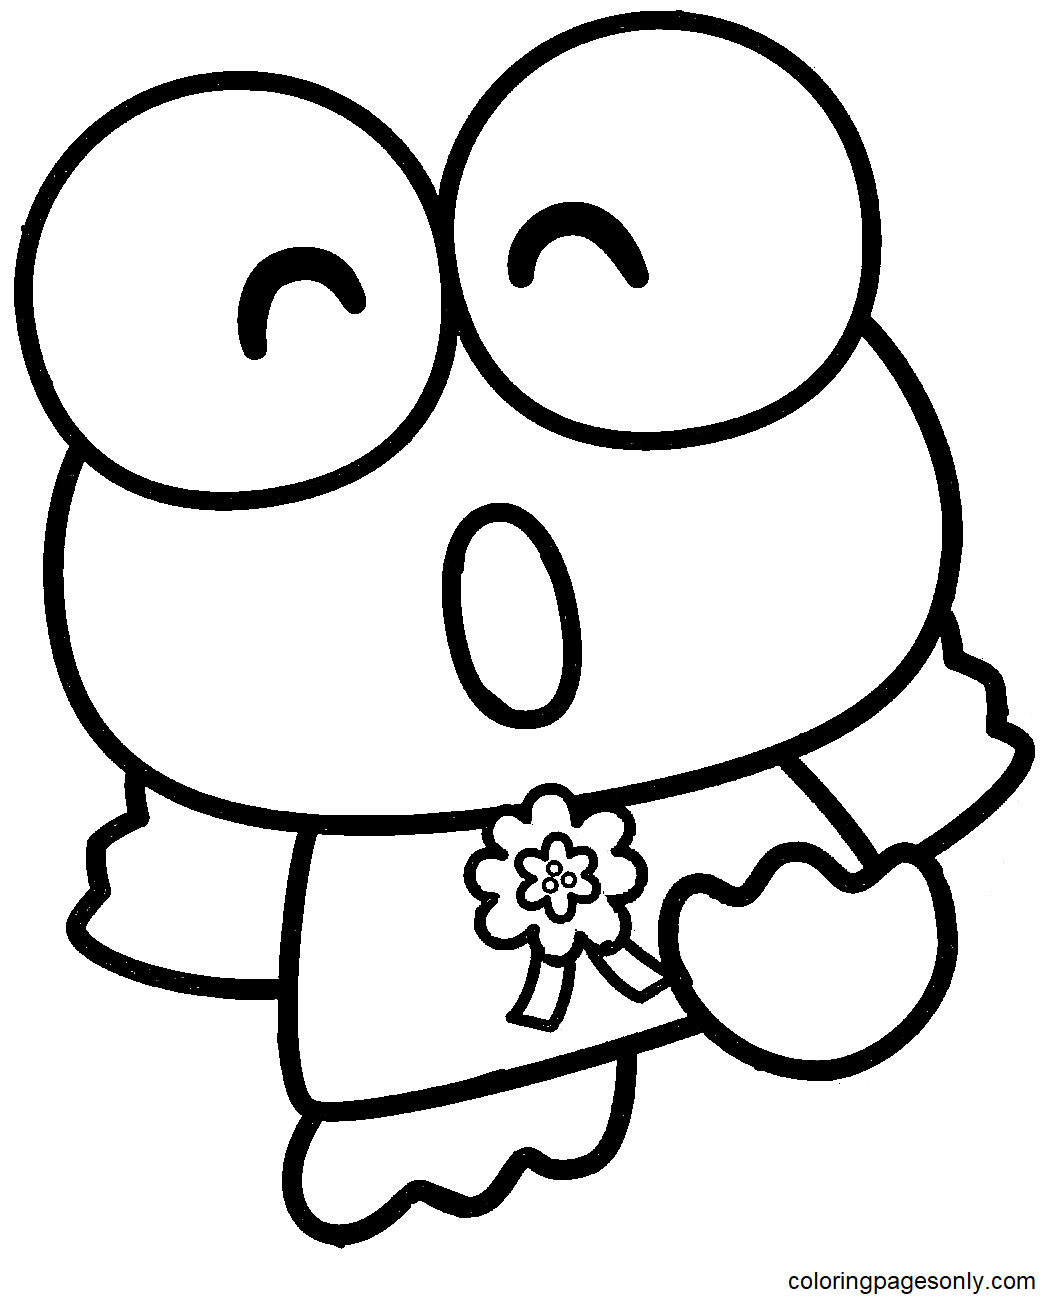 Funny Keroppi Coloring Page